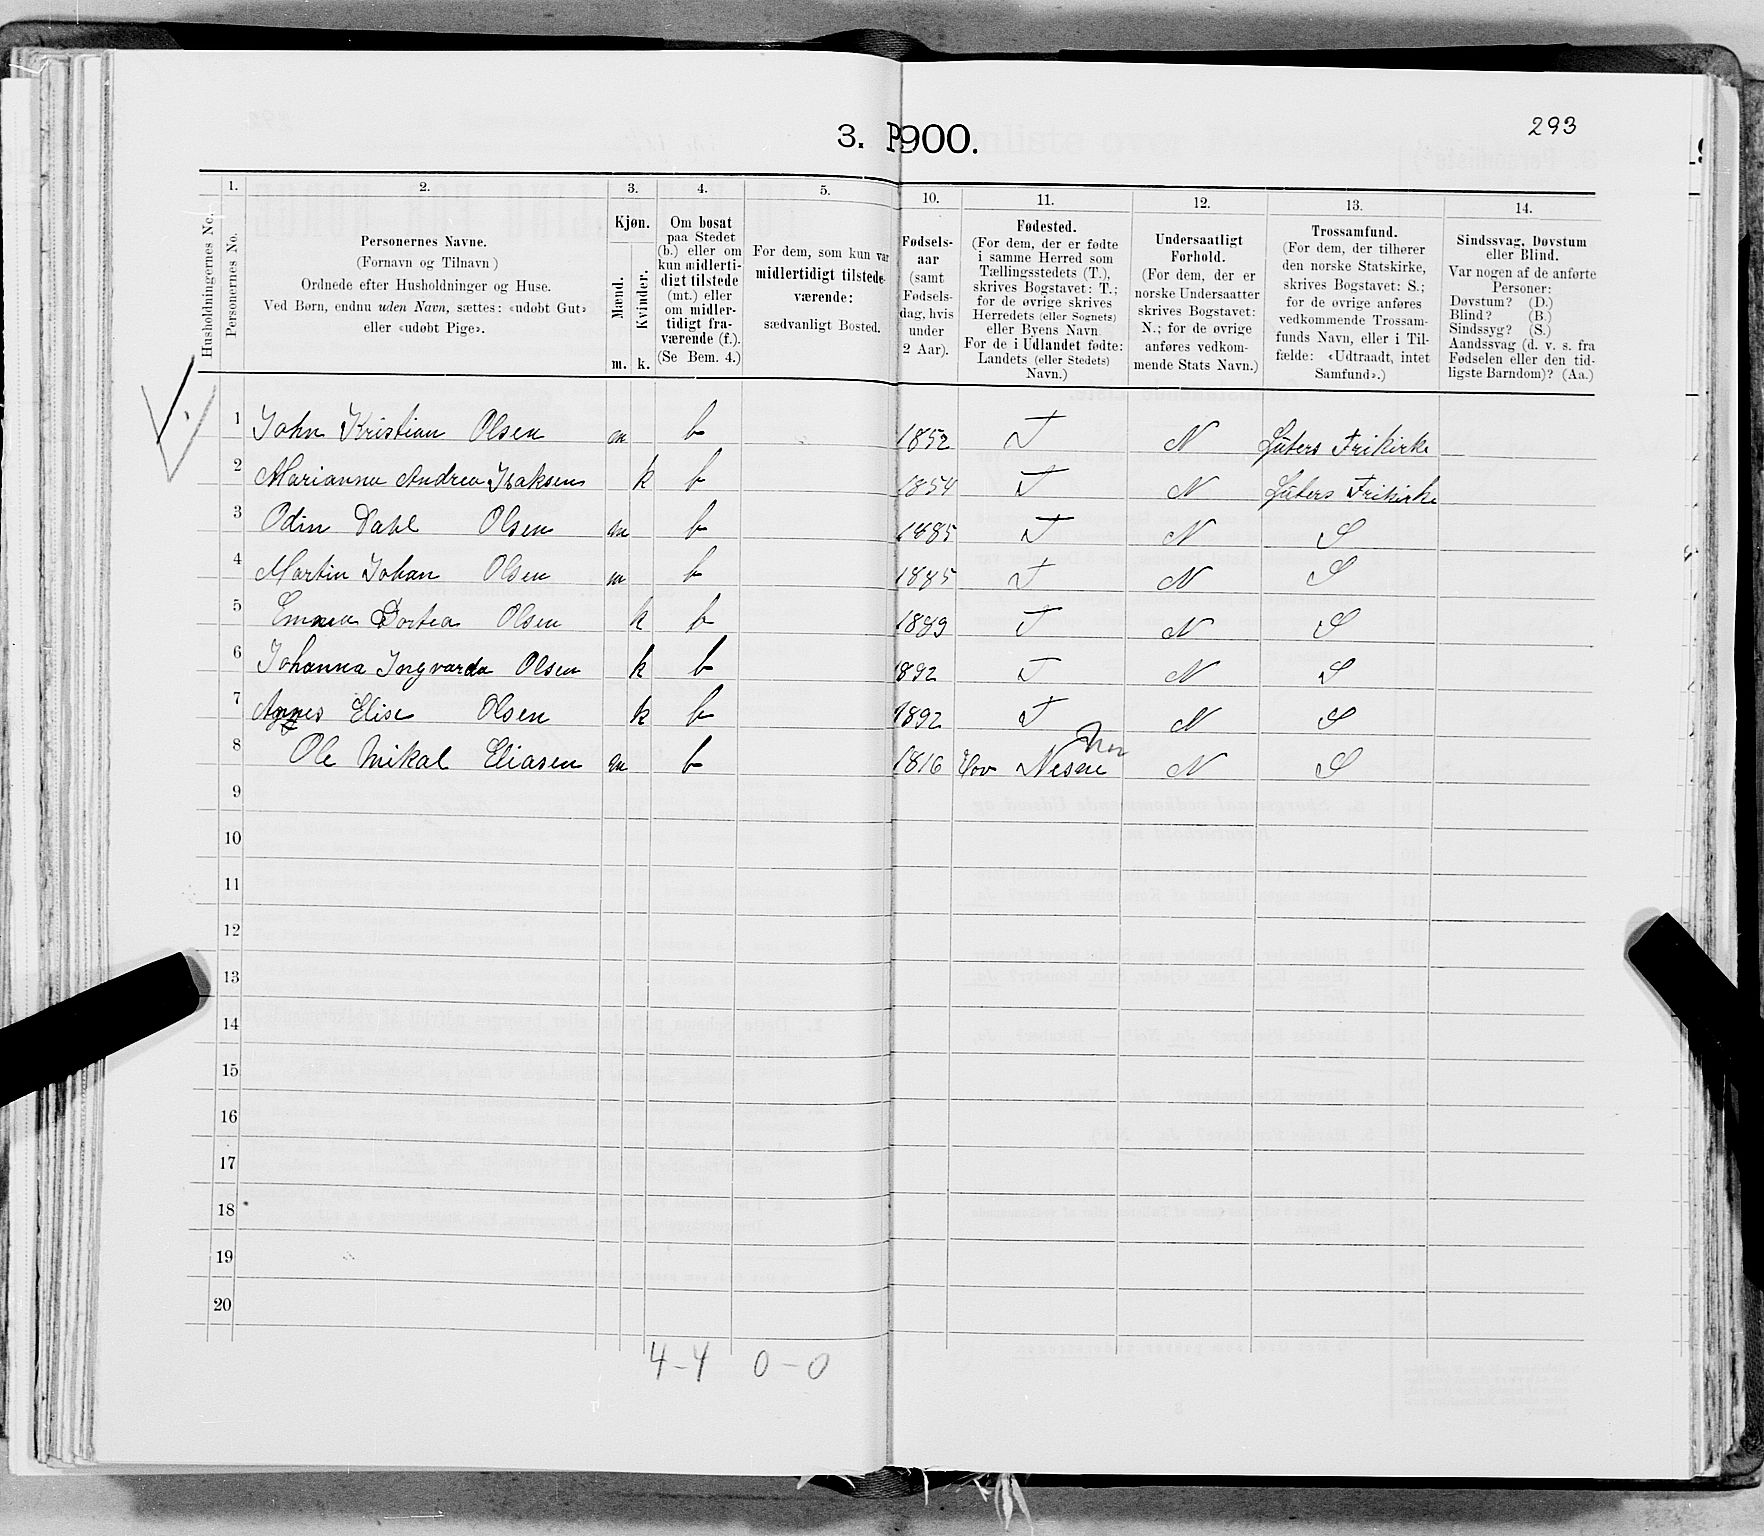 SAT, 1900 census for Meløy, 1900, p. 314